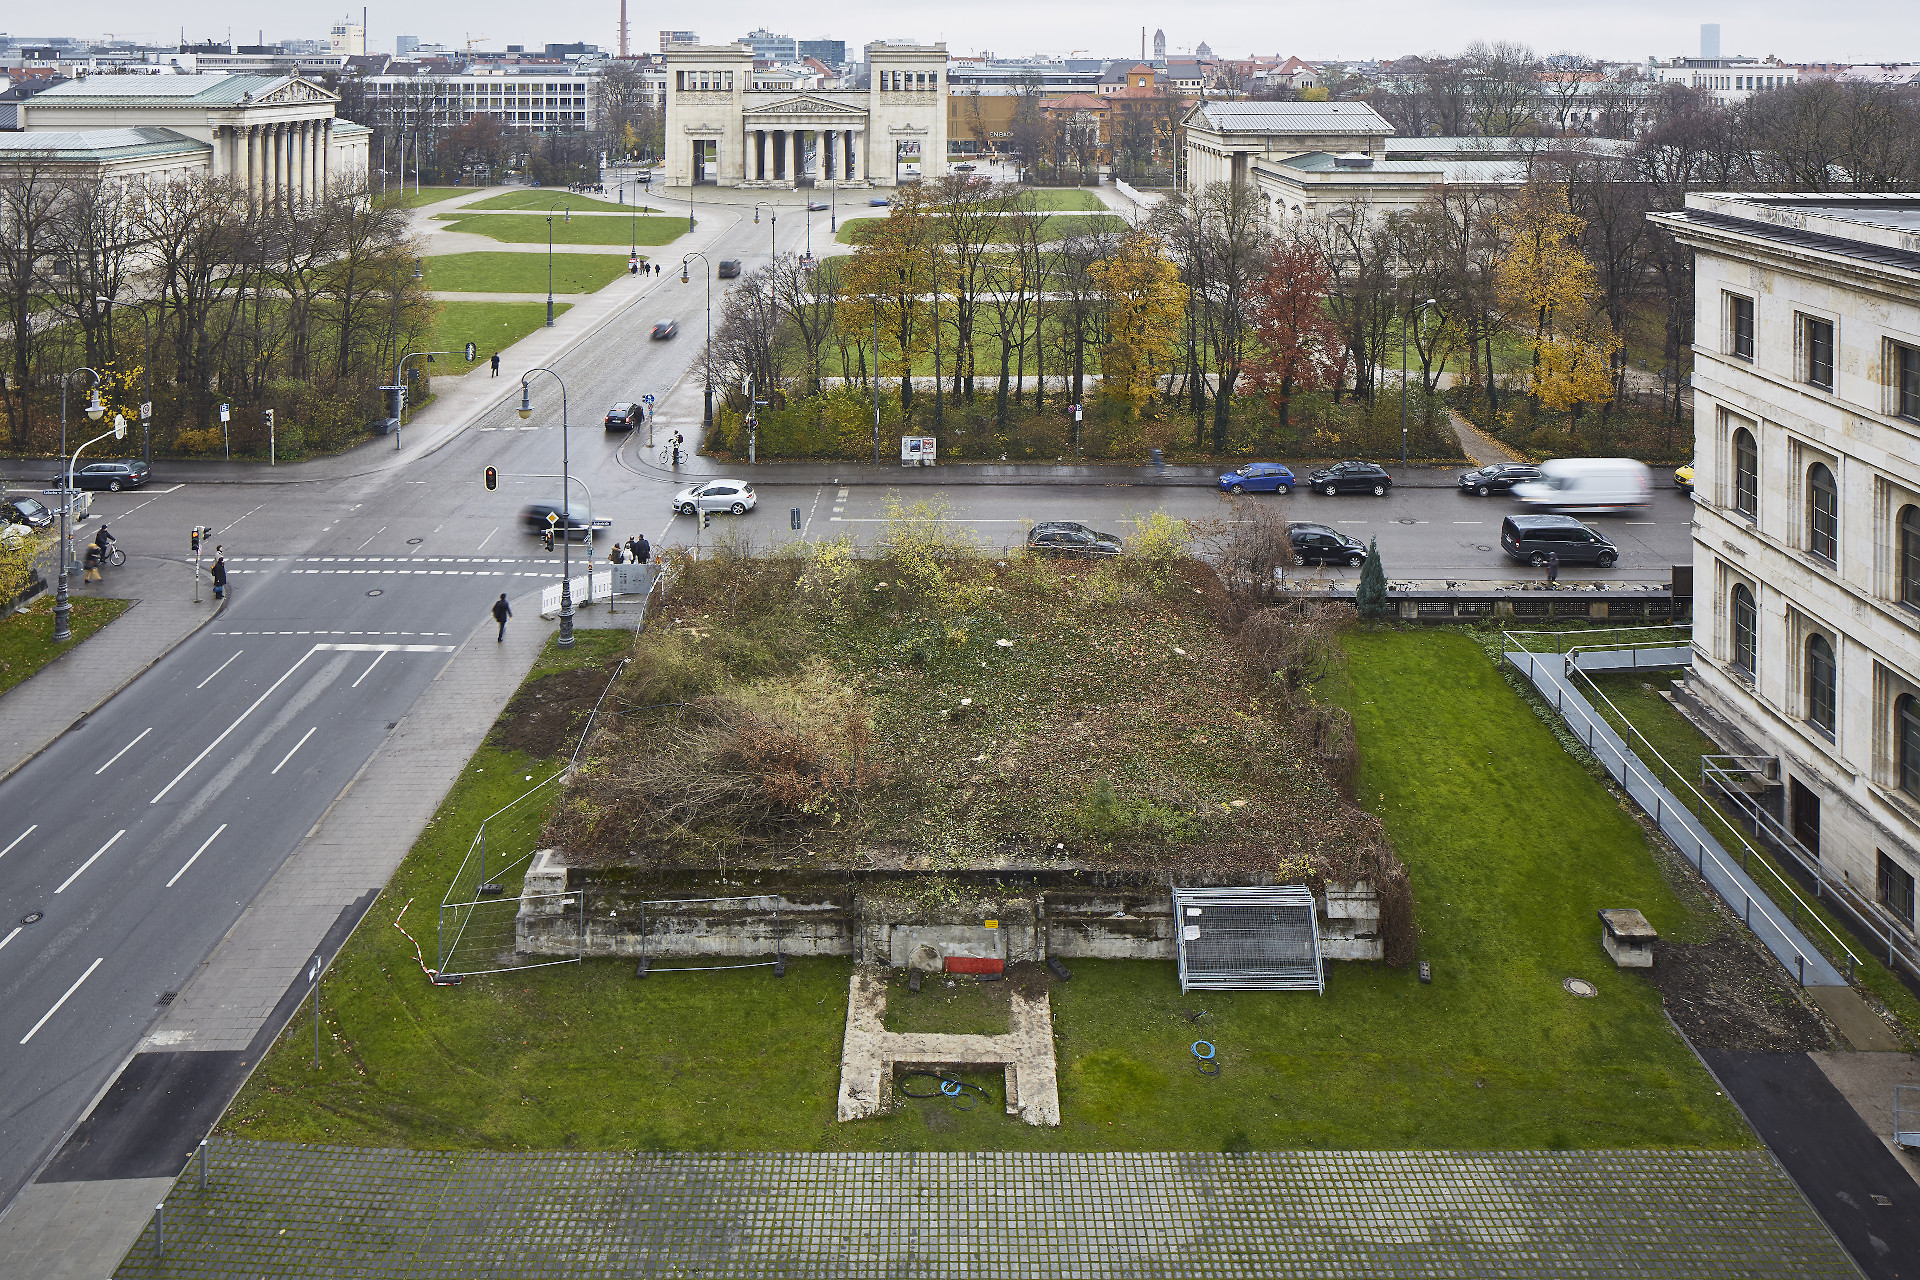 Plinth of a former “Temple of Honor” in front of the Munich Documentation Center. Behind it is Königsplatz, with the former “Führerbau” on the right.